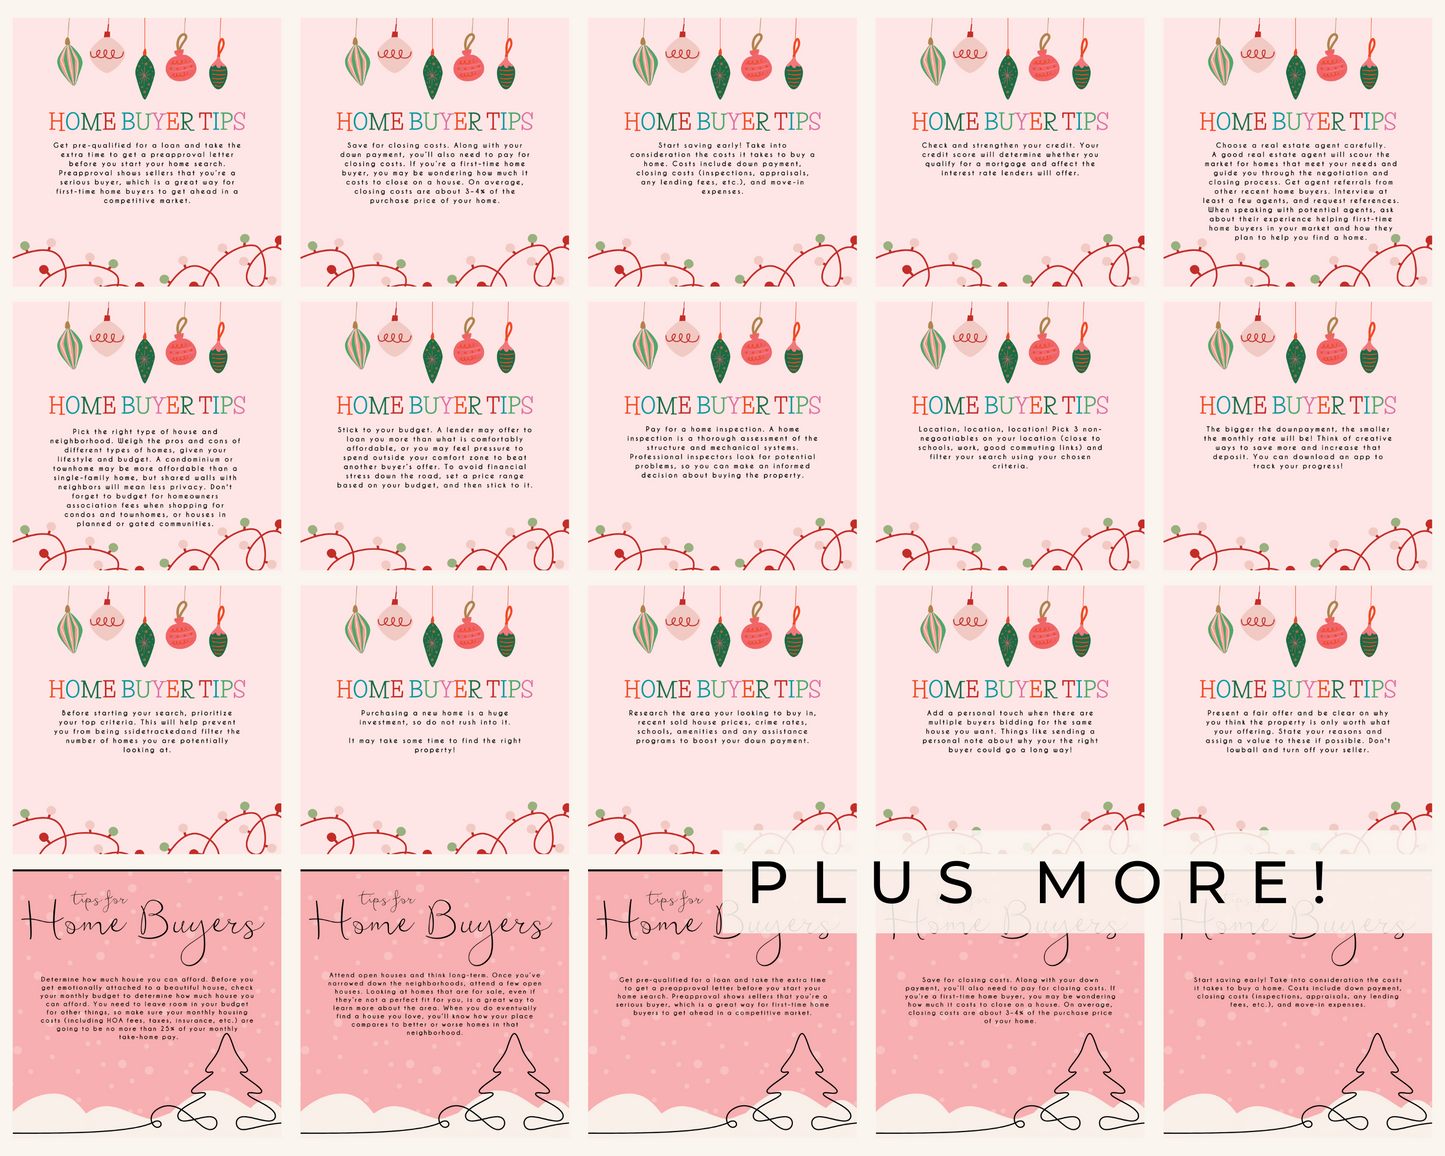 Real Estate Buyer and Seller Tips - Pink Holiday Edition